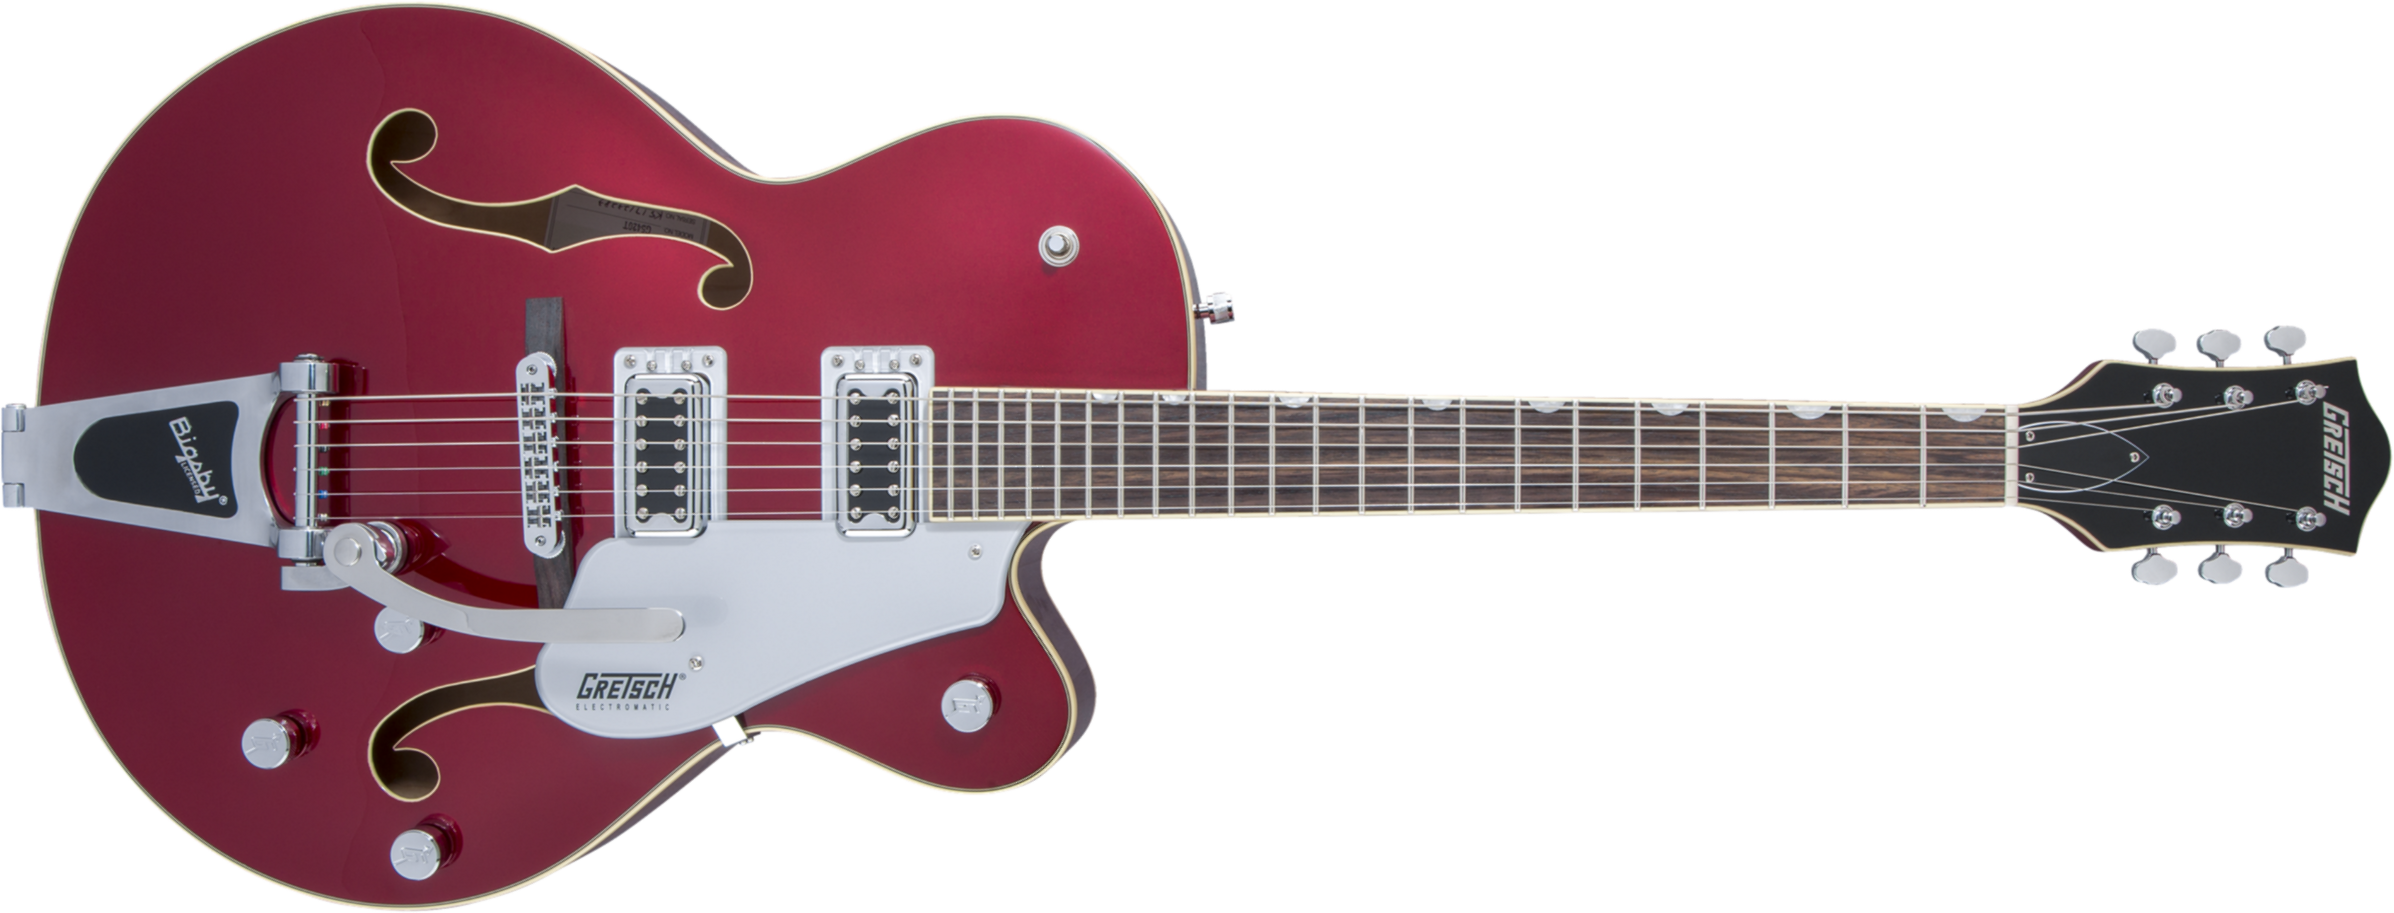 Gretsch G5420t Electromatic Hollow Body 2018 - Candy Apple Red - Semi-Hollow E-Gitarre - Main picture